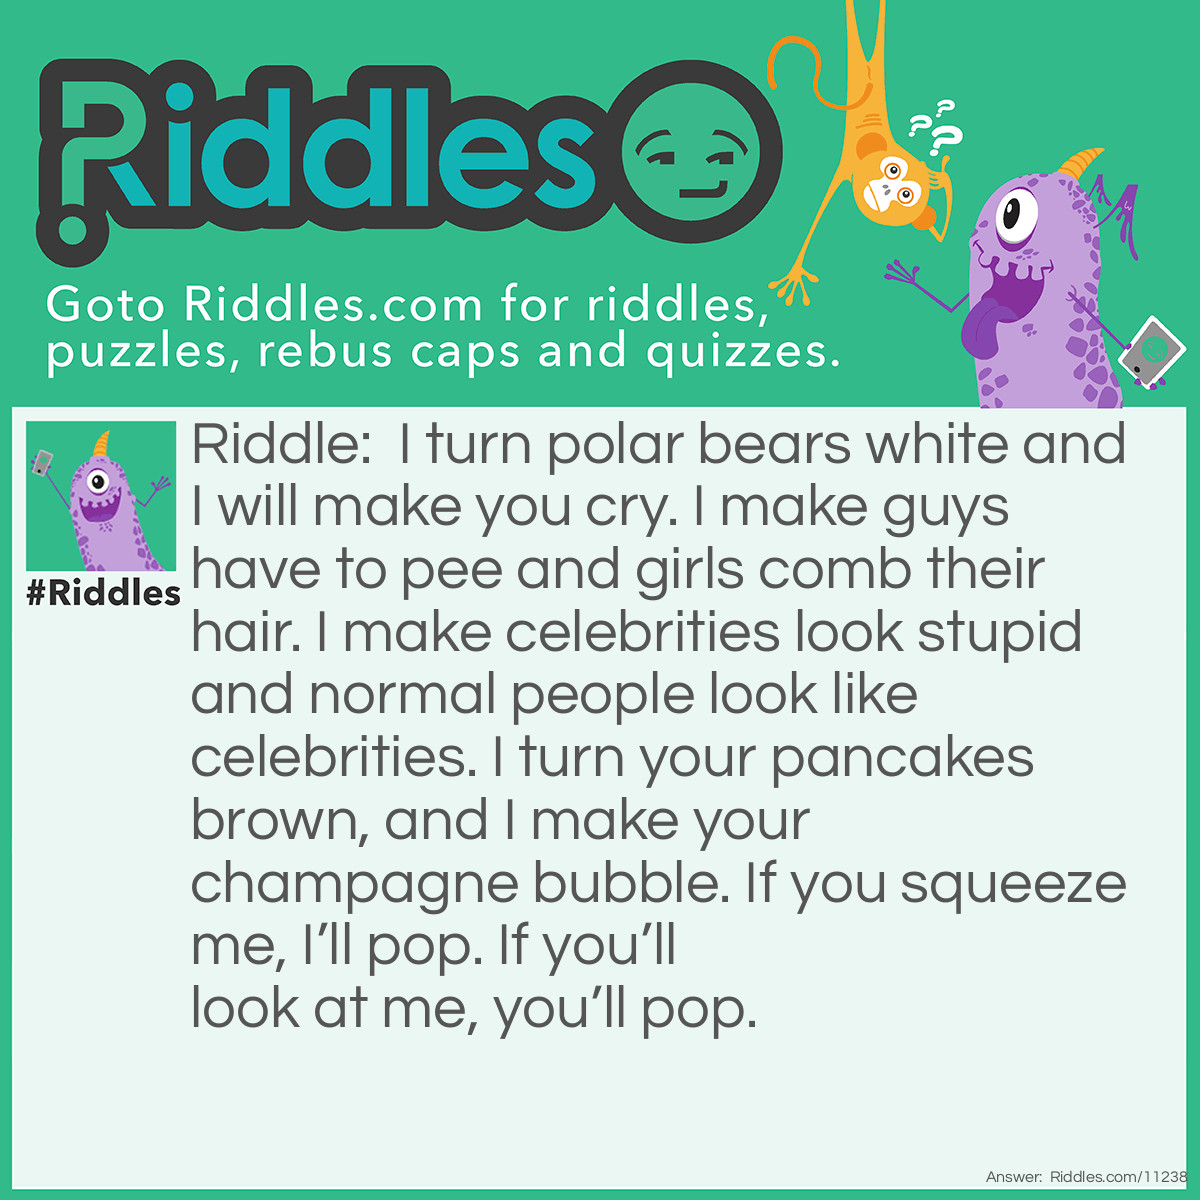 Riddle: I turn polar bears white and I will make you cry. I make guys have to pee and girls comb their hair. I make celebrities look stupid and normal people look like celebrities. I turn your pancakes brown, and I make your champagne bubble. If you squeeze me, I’ll pop. If you’ll look at me, you’ll pop. Answer: Nothing.